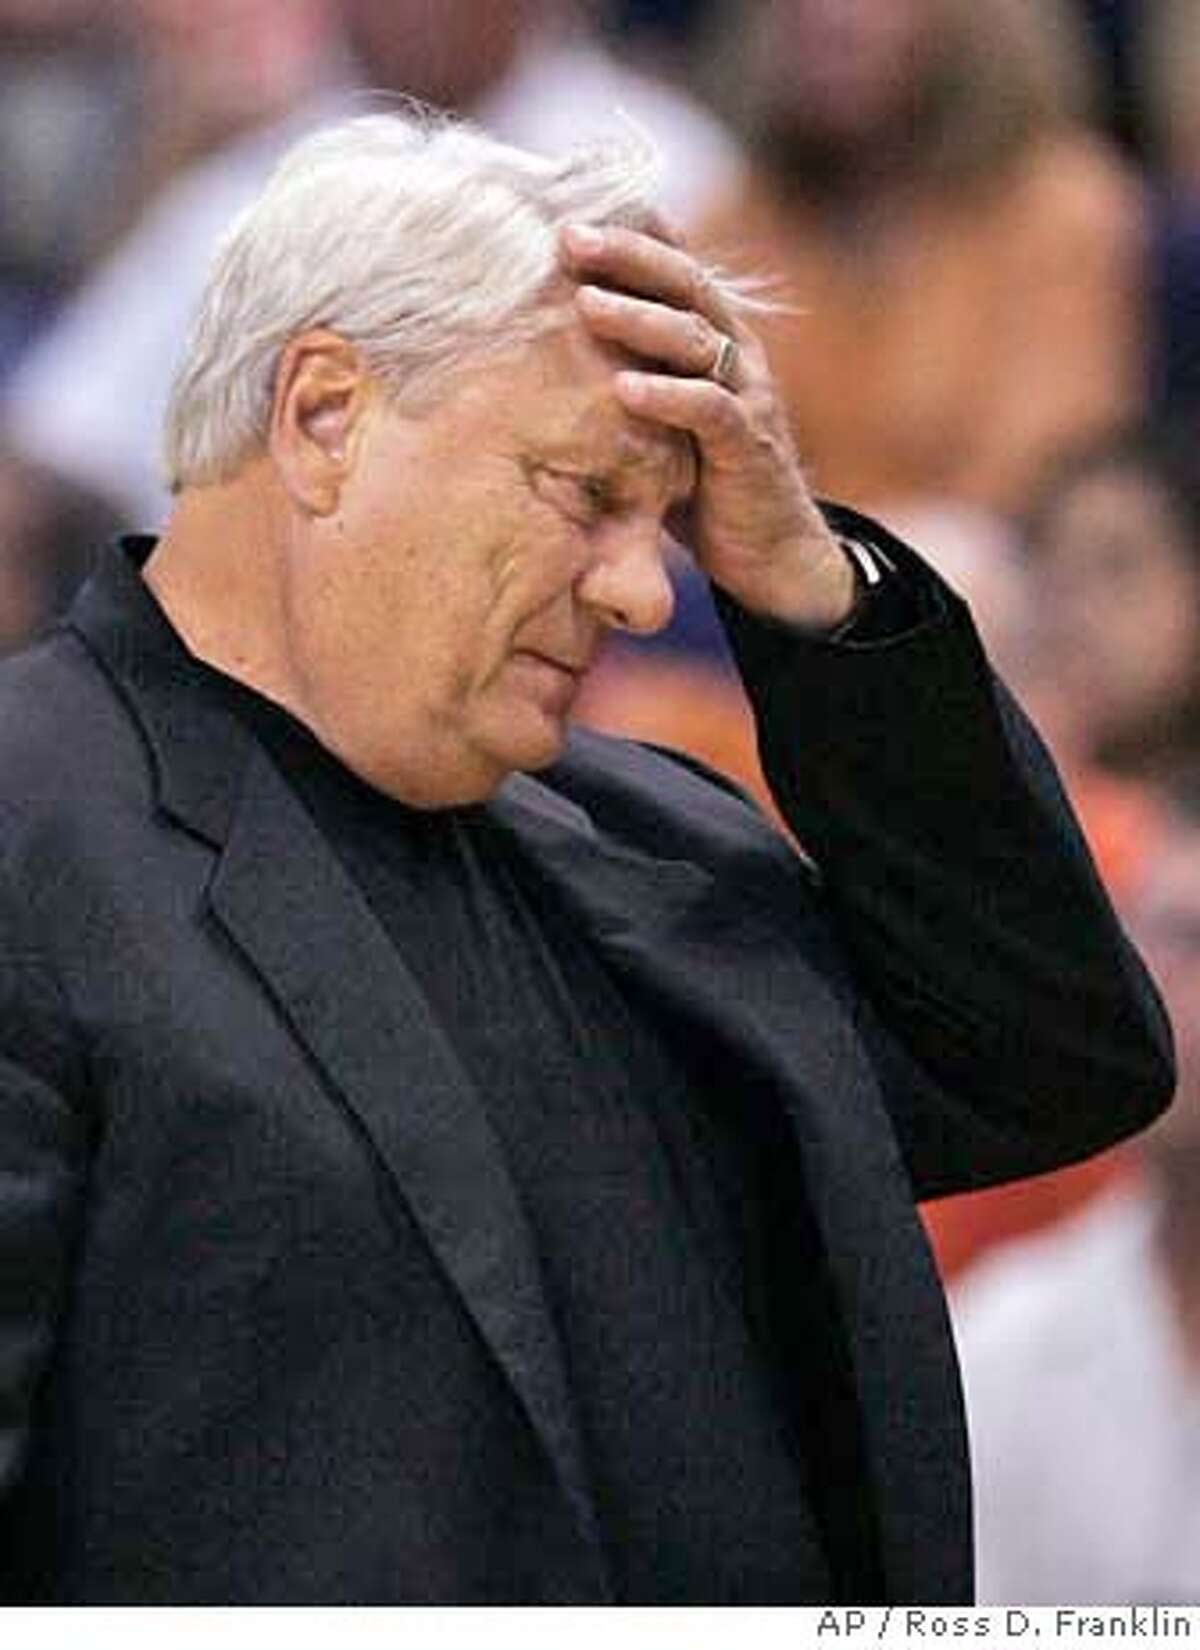 ###Live Caption:Golden State Warriors head coach Don Nelson reacts to the closing moments in the fourth quarter of an NBA basketball game against the Phoenix Suns Monday, April 14, 2008, in Phoenix. The Suns defeated the Warriors 122-116. (AP Photo/Ross D. Franklin)###Caption History:Golden State Warriors head coach Don Nelson reacts to the closing moments in the fourth quarter of an NBA basketball game against the Phoenix Suns Monday, April 14, 2008, in Phoenix. The Suns defeated the Warriors 122-116. (AP Photo/Ross D. Franklin)###Notes:Don Nelson###Special Instructions:EFE OUT